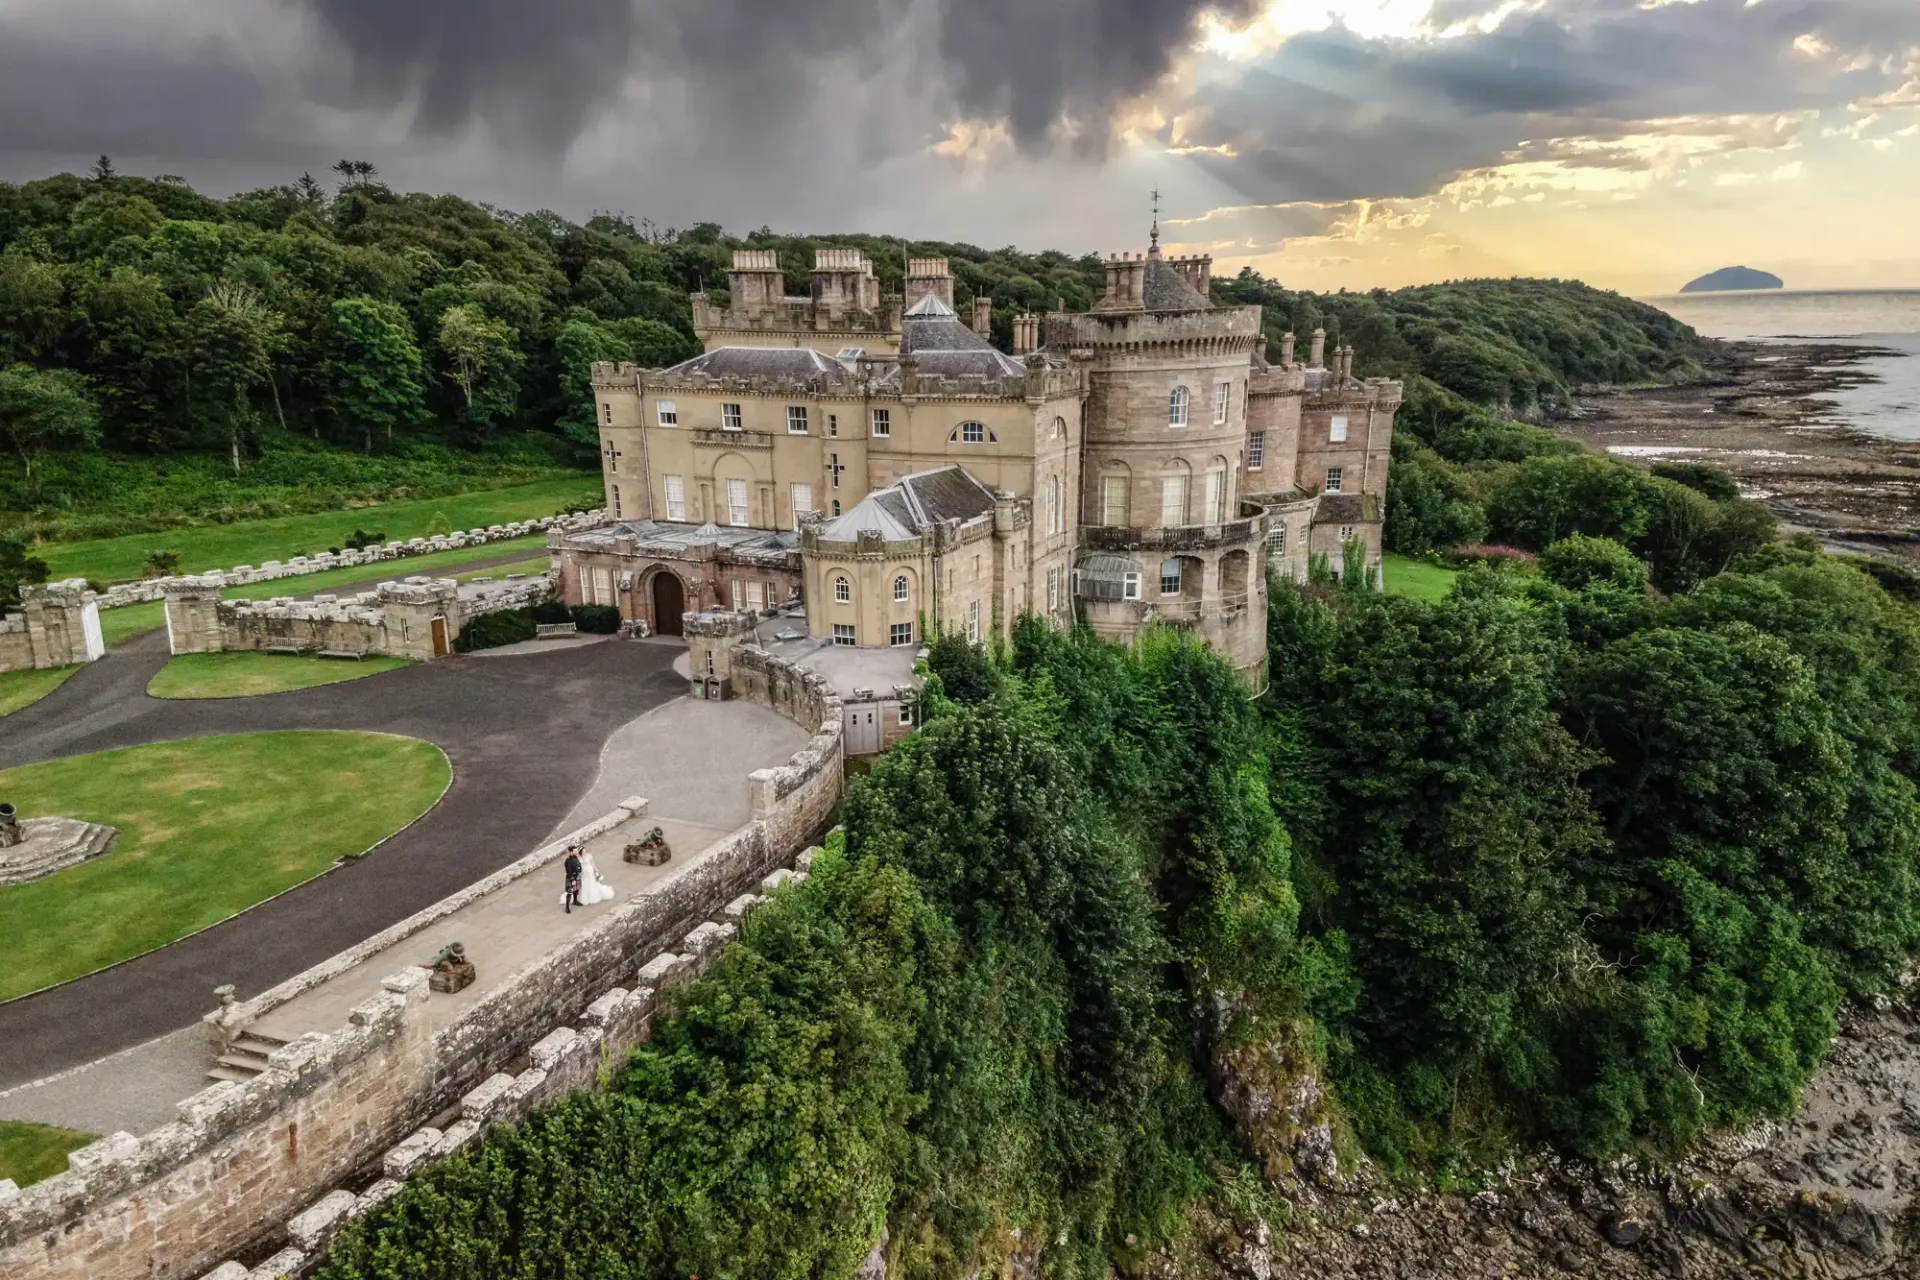 Aerial view of a bride and groom standing beside large, historic stone Culzean Castle with multiple turrets, surrounded by lush greenery, located near a rocky coastline. The sky is partly cloudy with sunlight breaking through.